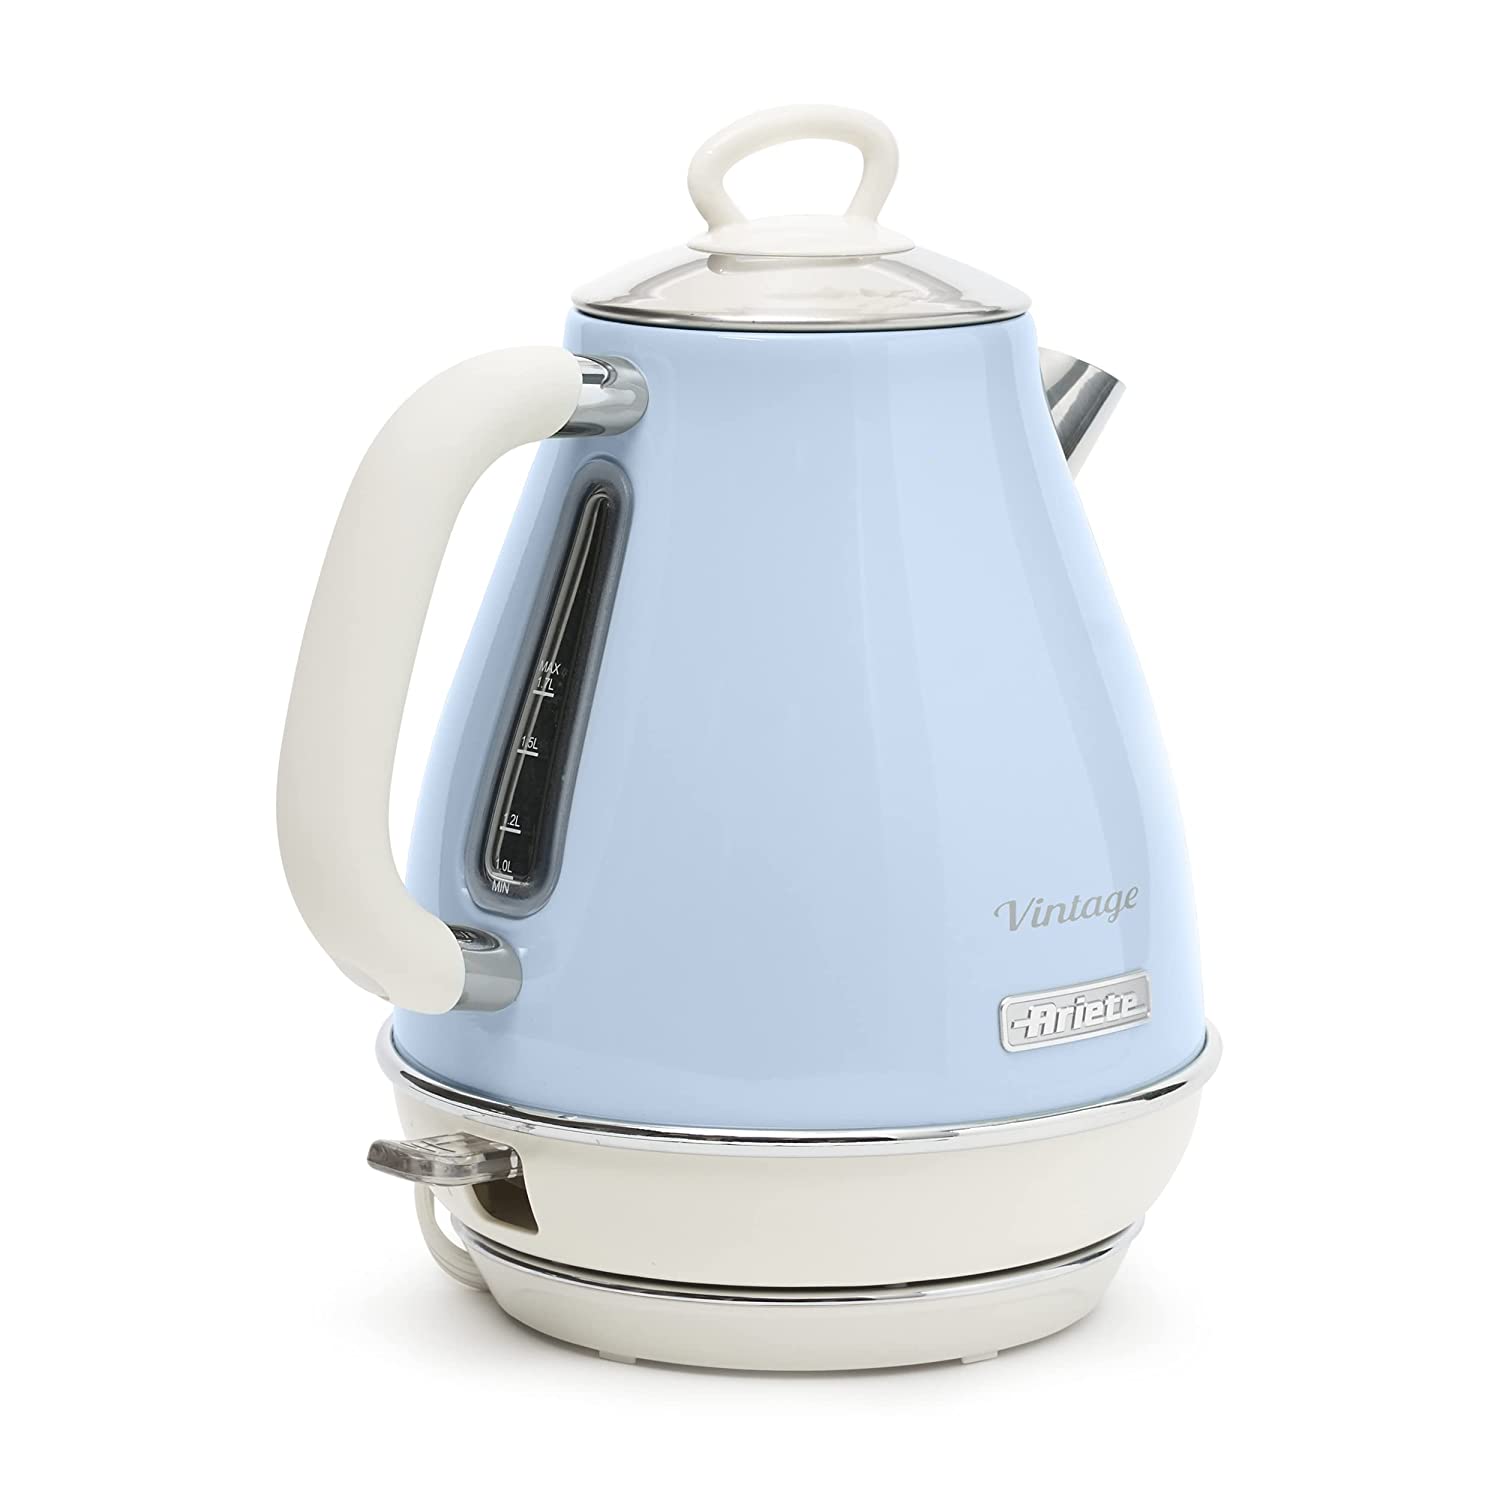 Ariete 2869 Vintage Electric Kettle, Stainless Steel, 1.7 L, Auto Switch Off, 2000 W, Pastel Blue